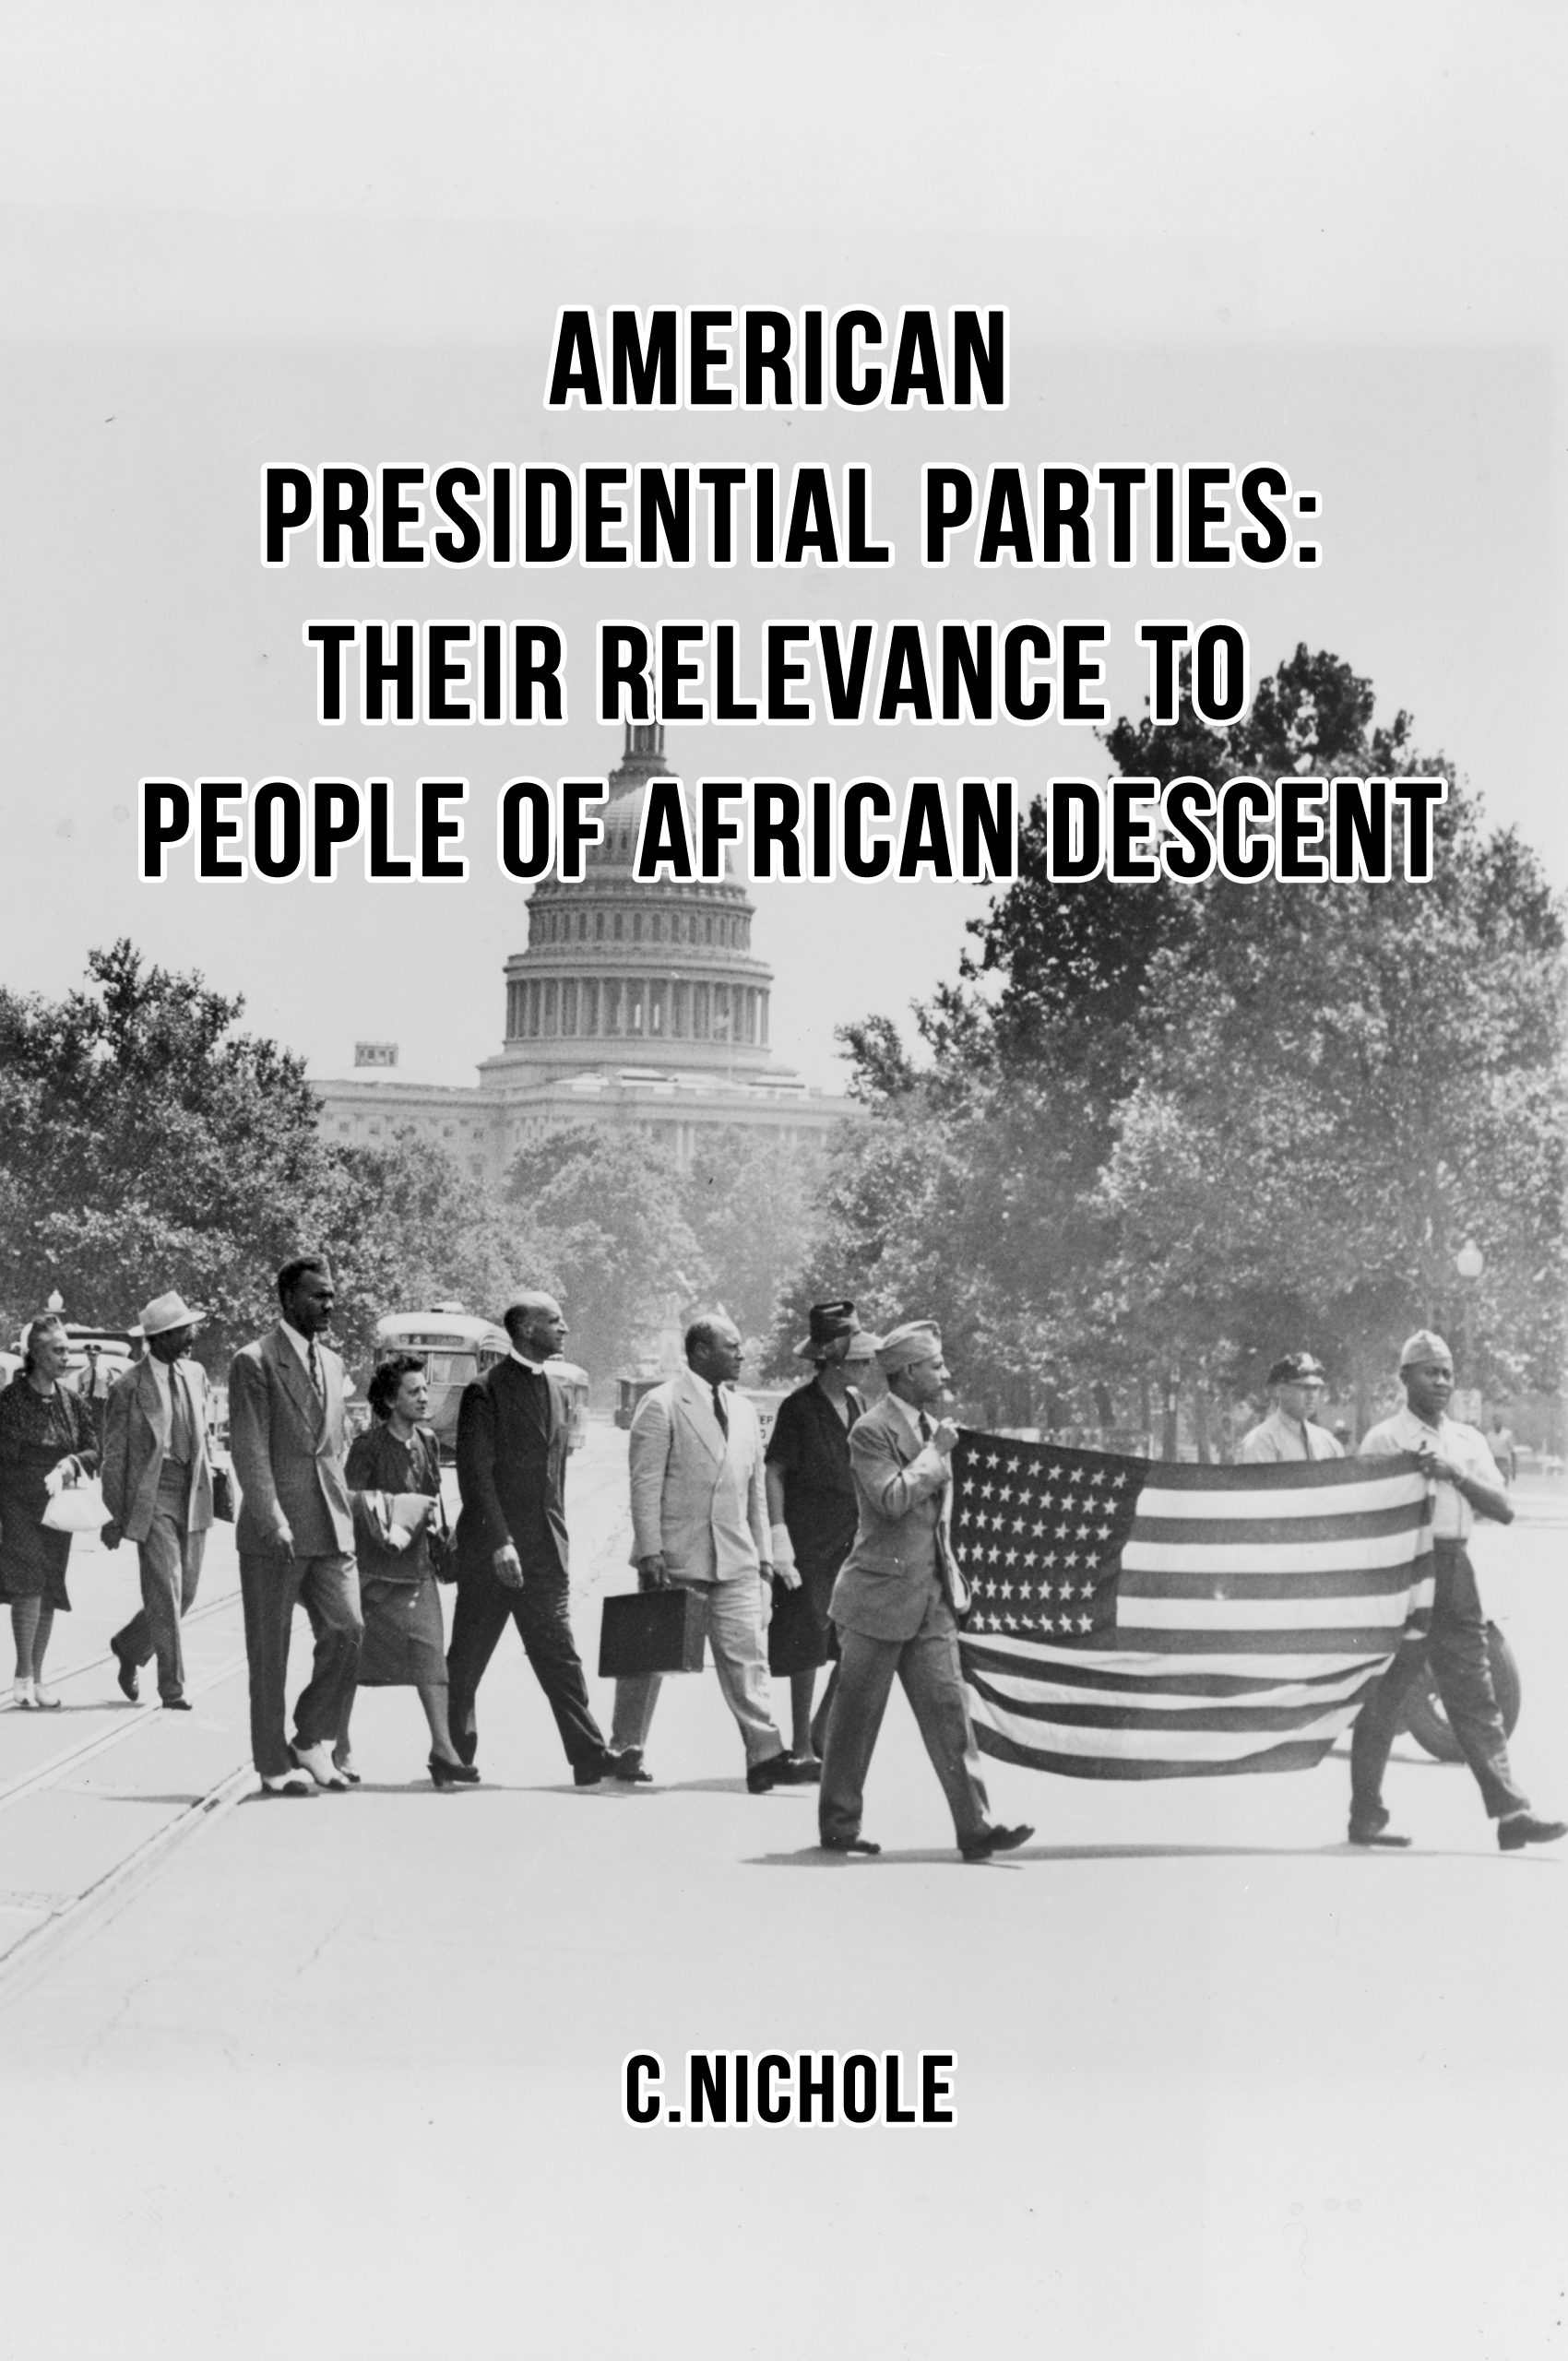 American Presidential Parties: Their Relevance to People of African Descent